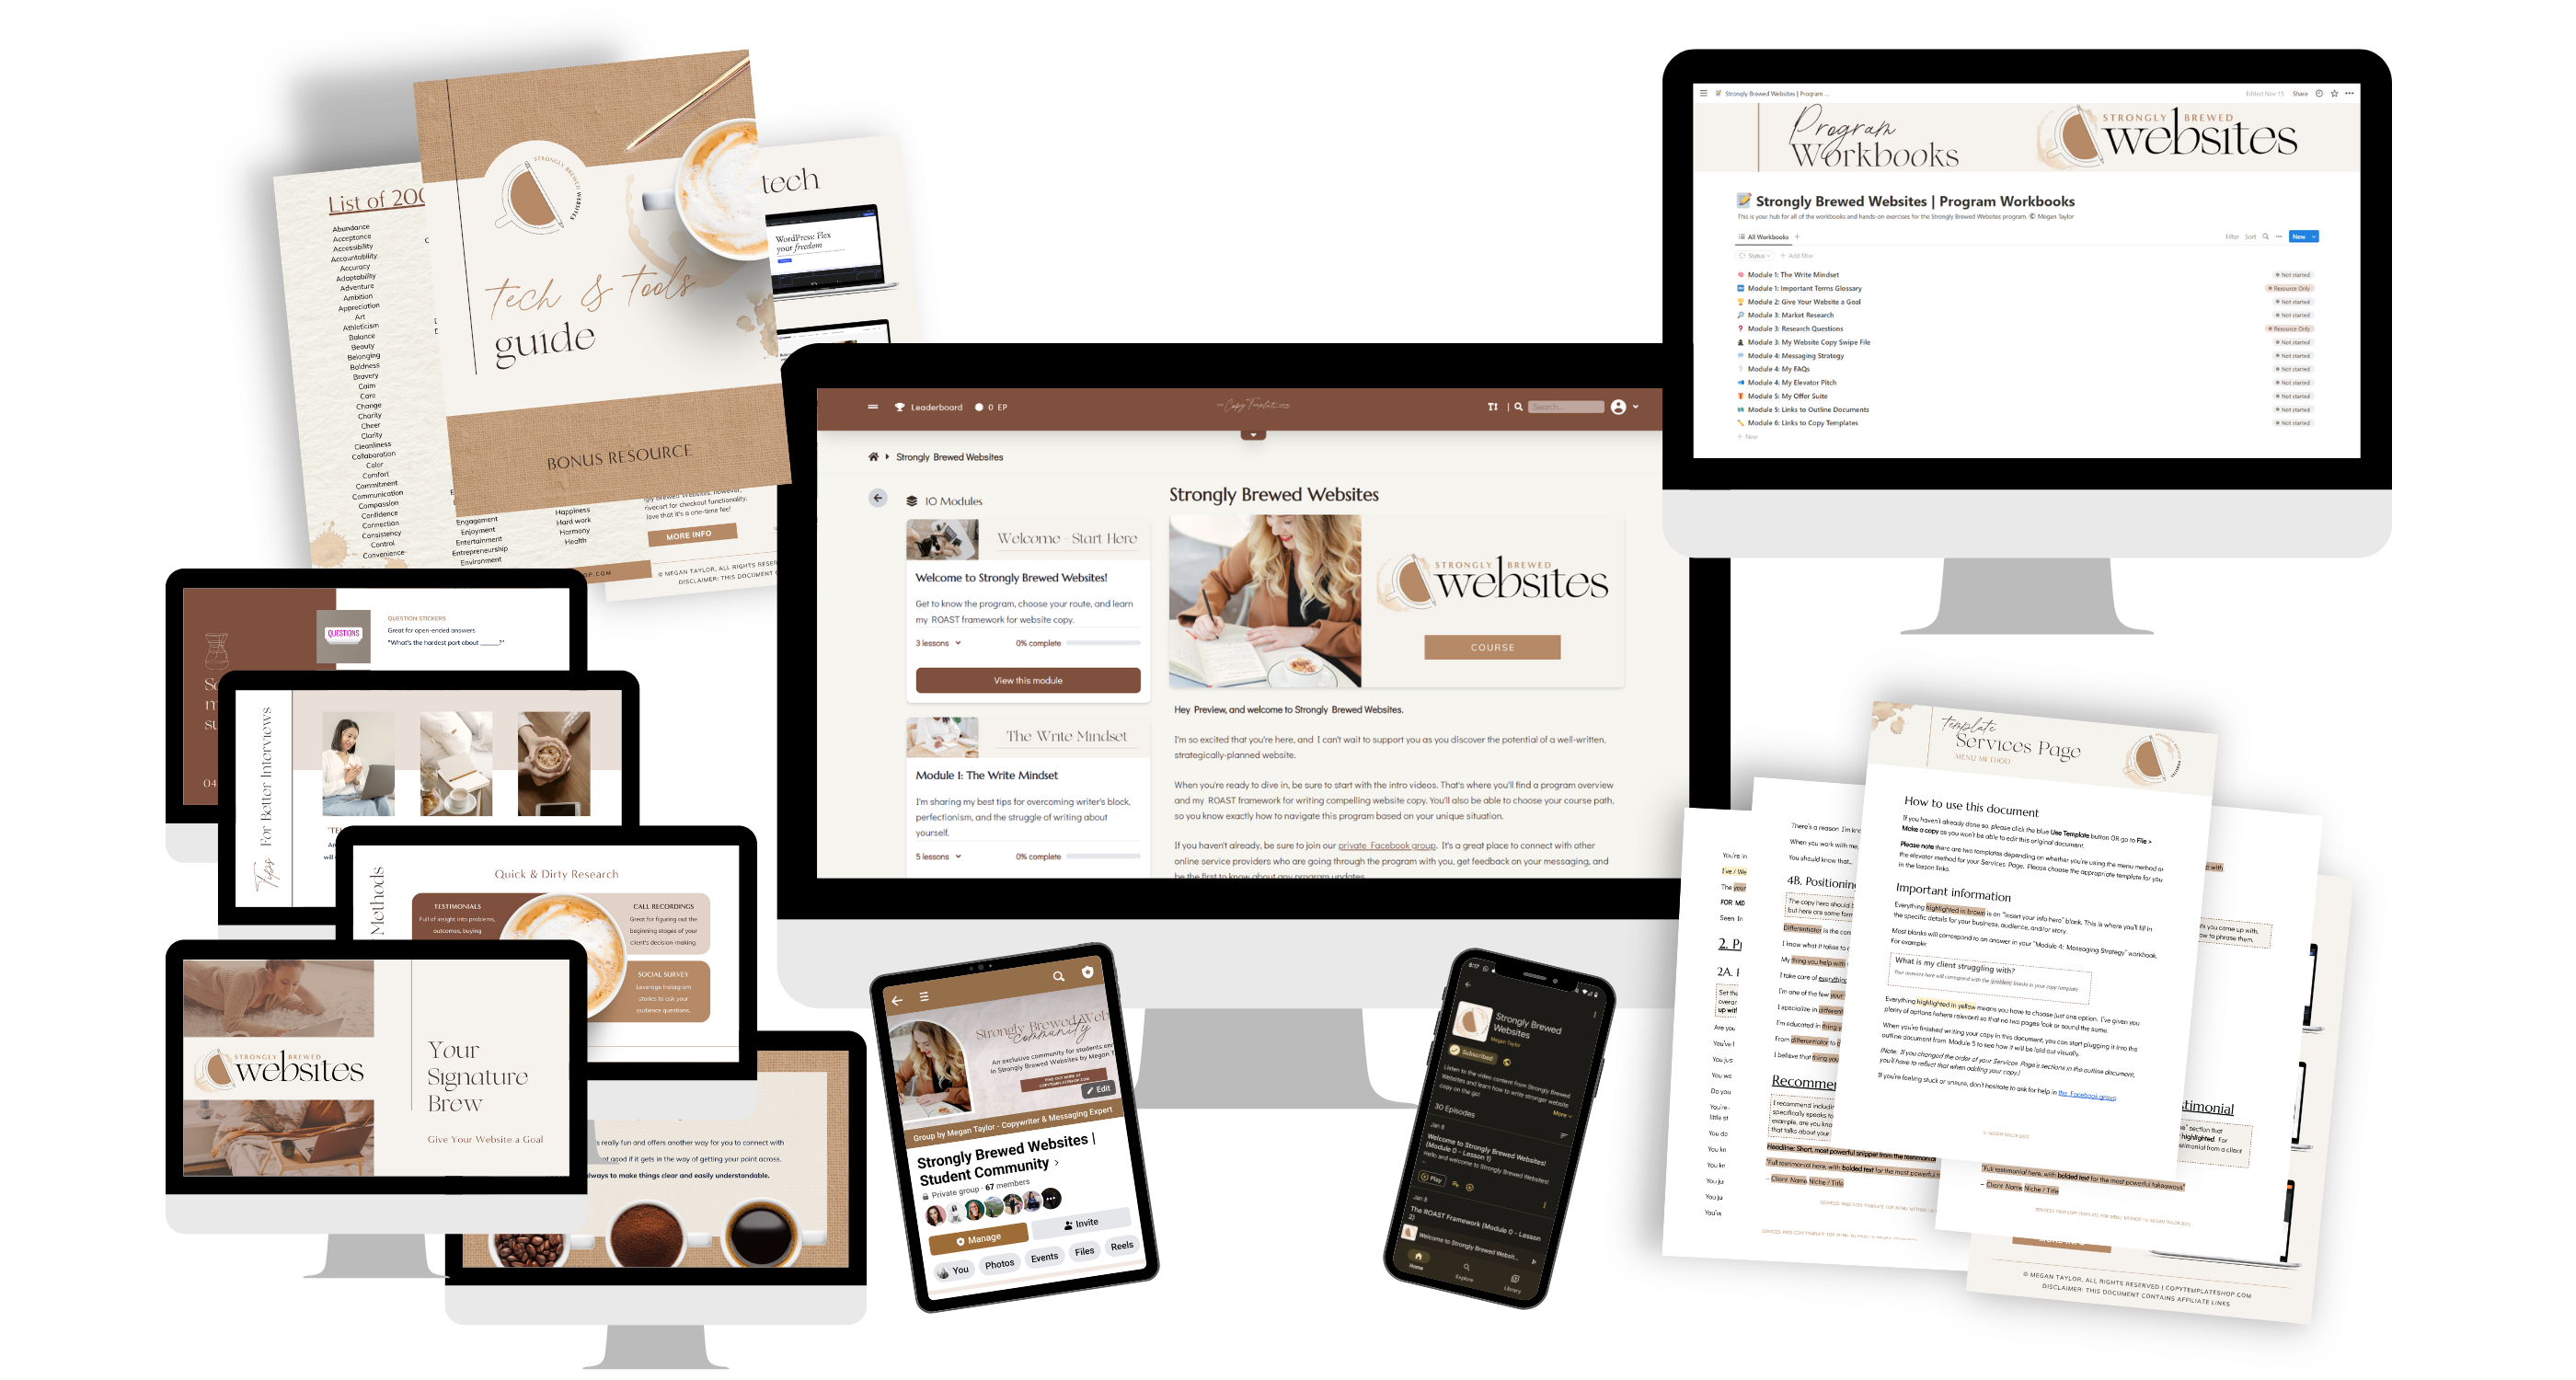 mockup showing the full contents of strongly brewed websites, a website copywriting course by megan taylor